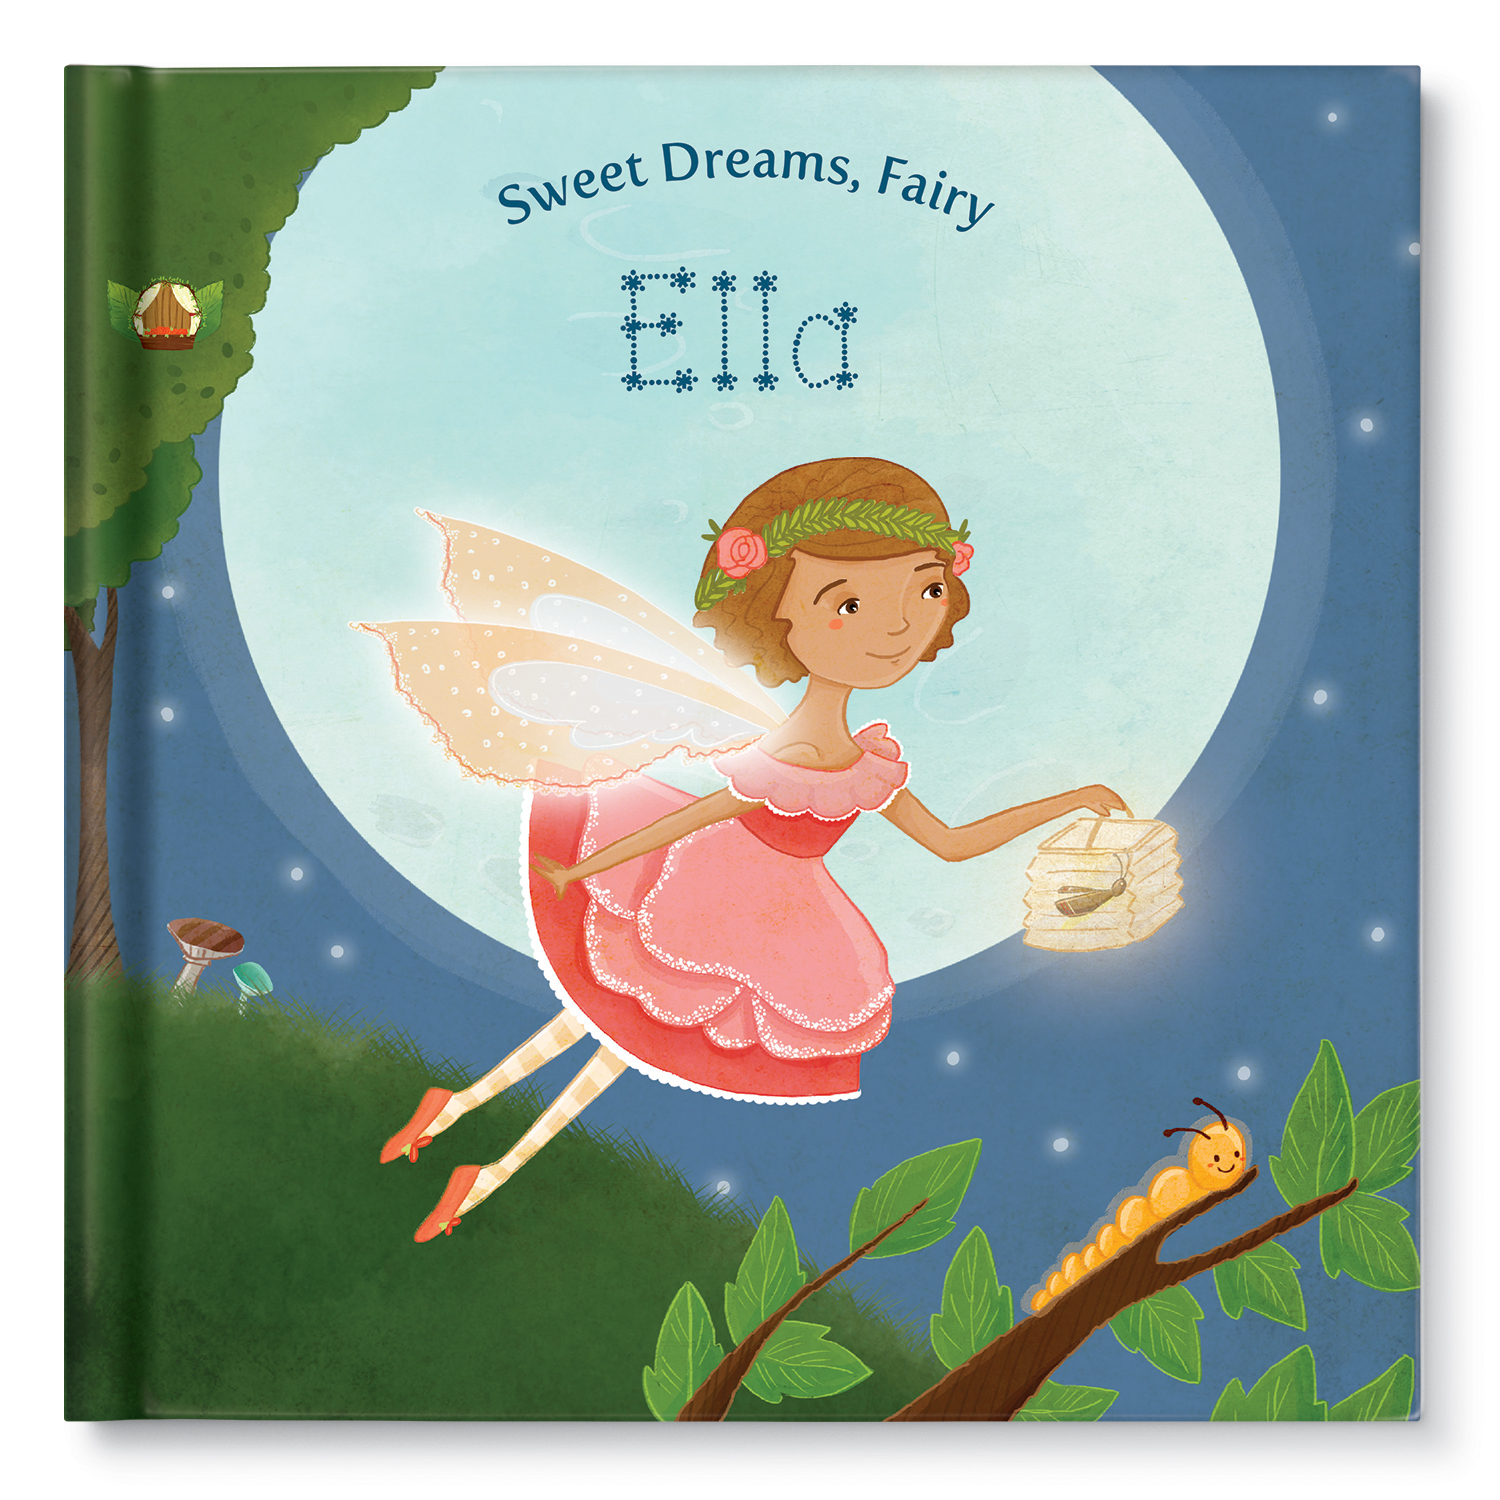 Children’s personalized bookseller ISeeMe.com's new release, "Sweet Dreams Fairy," is an enchanting fairy tale developed by Chronicle Books.